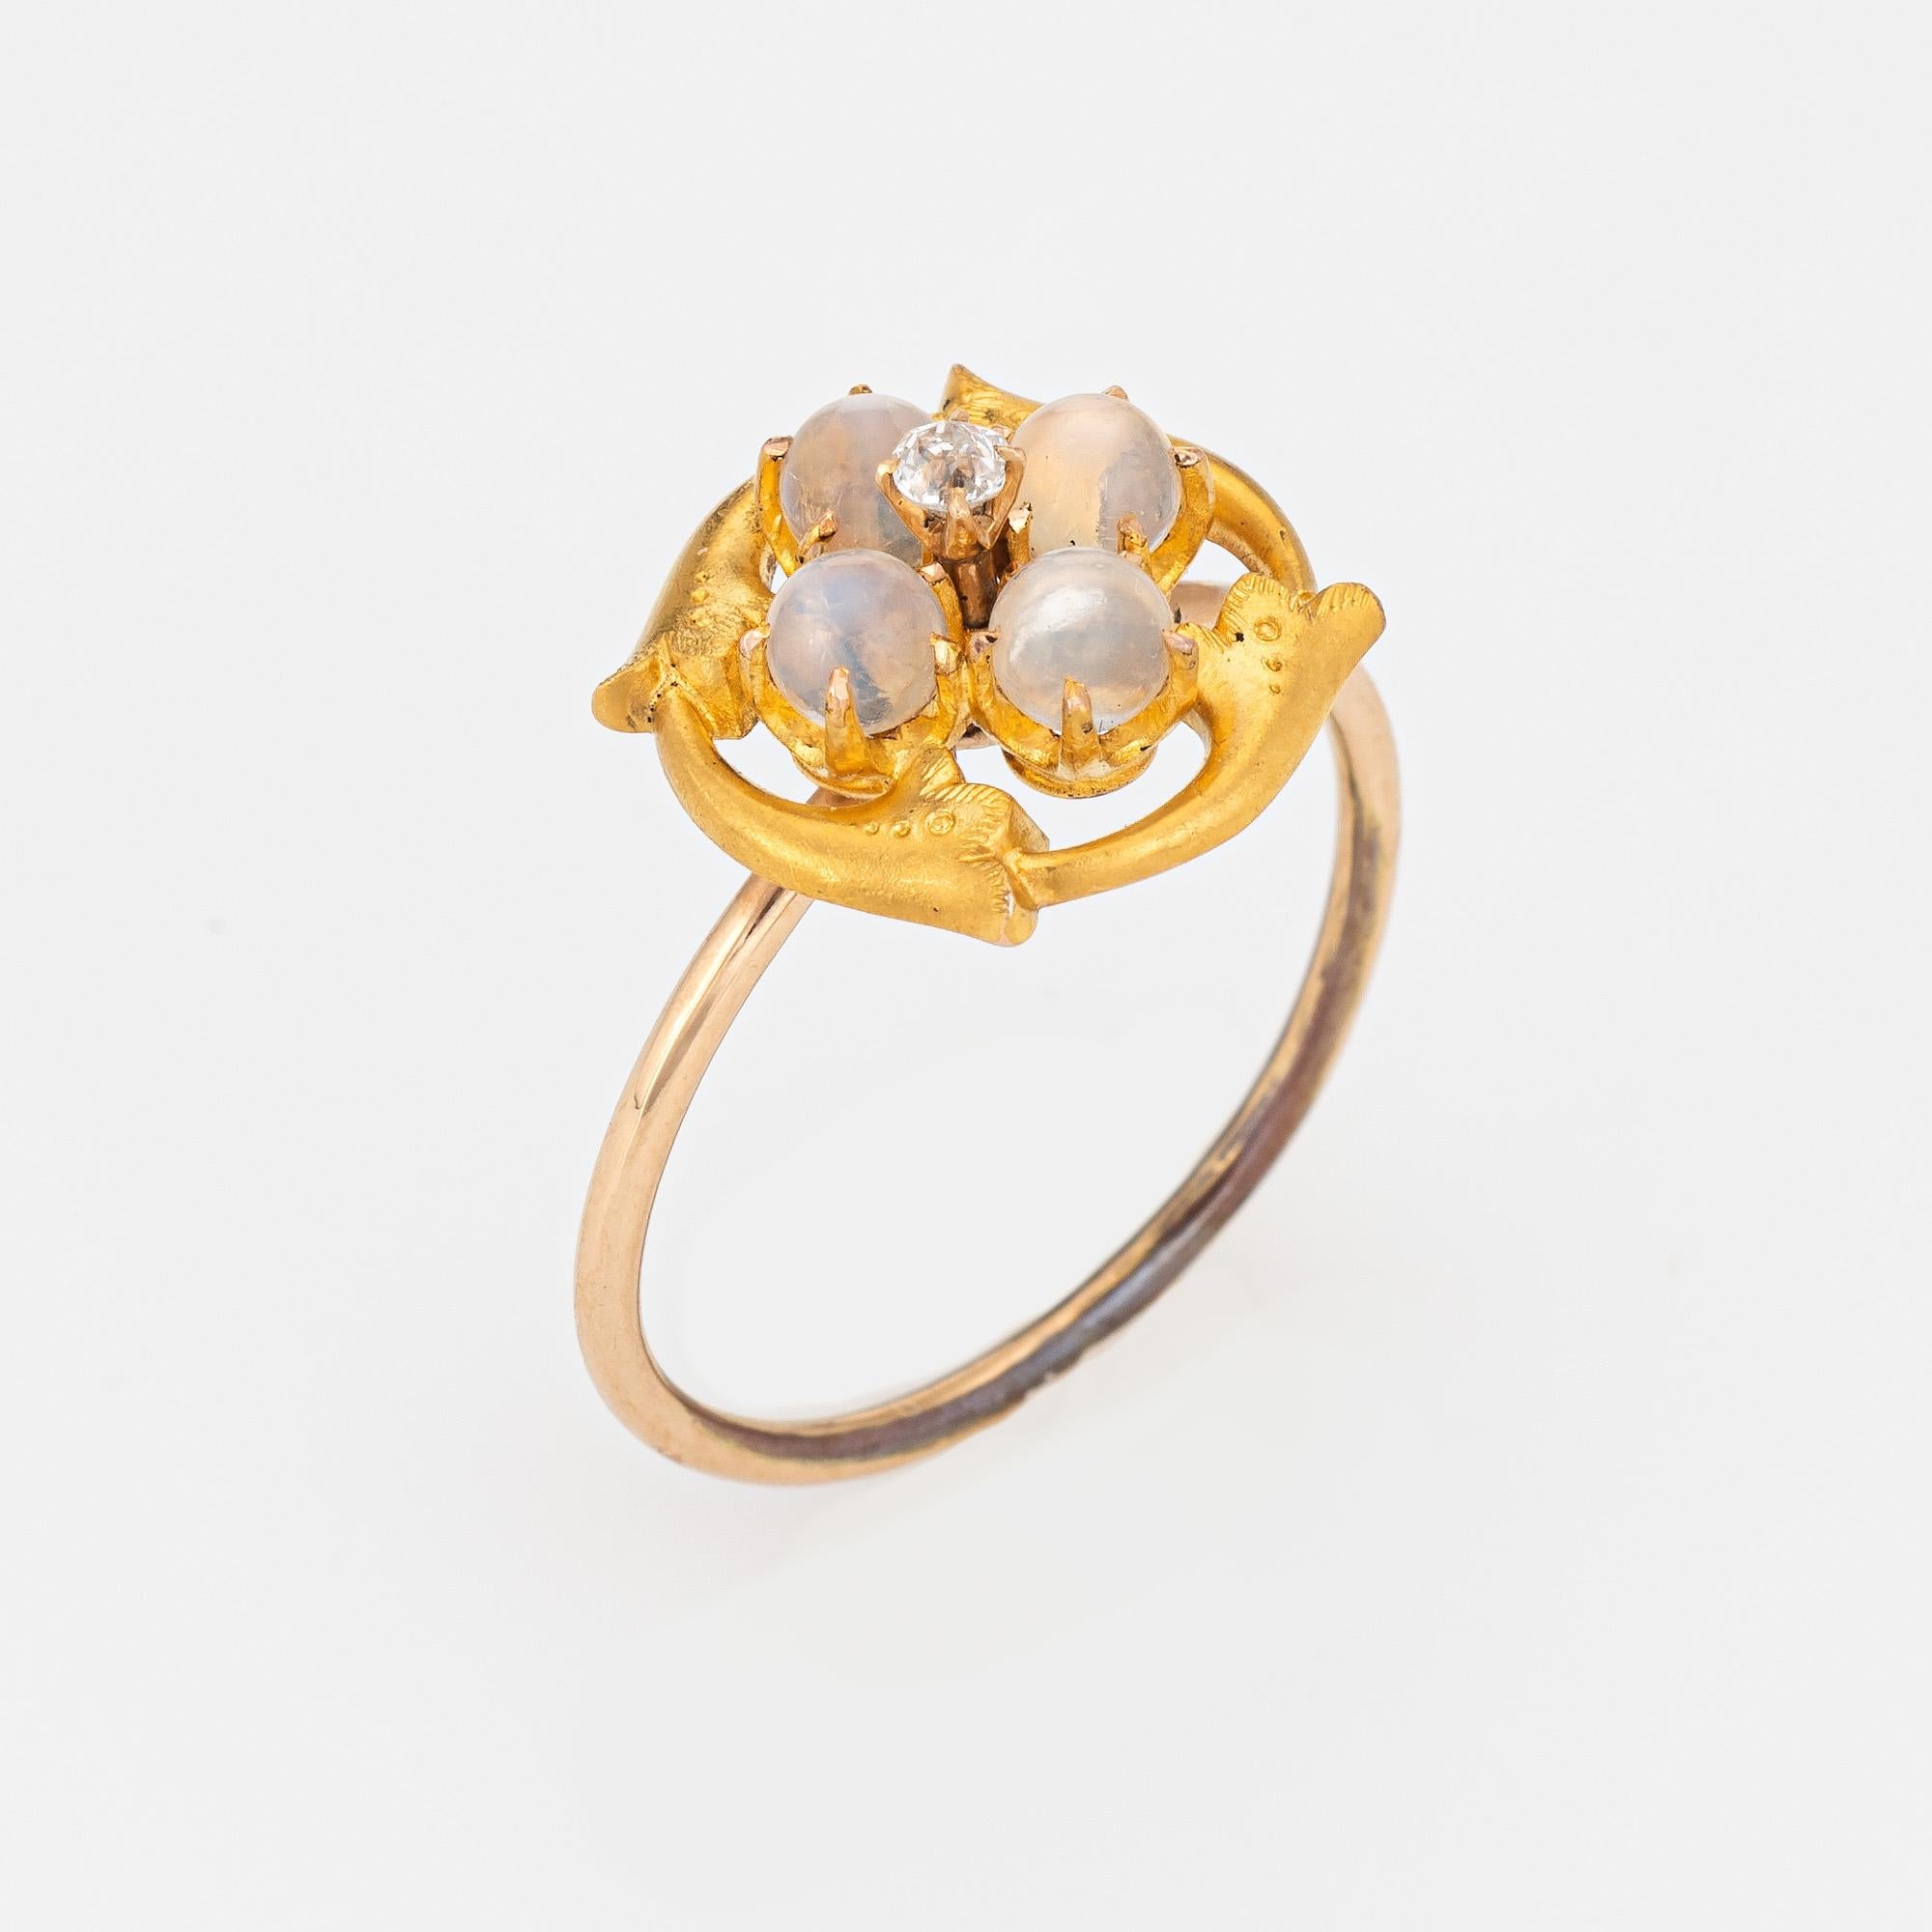 Originally an antique Victorian era stick pin (circa 1880s to 1900s), the moonstone & diamond ring is crafted in 14 karat yellow gold.

The ring is mounted with the original stick pin. Our jeweler rounded the stick pin into a slim band for the